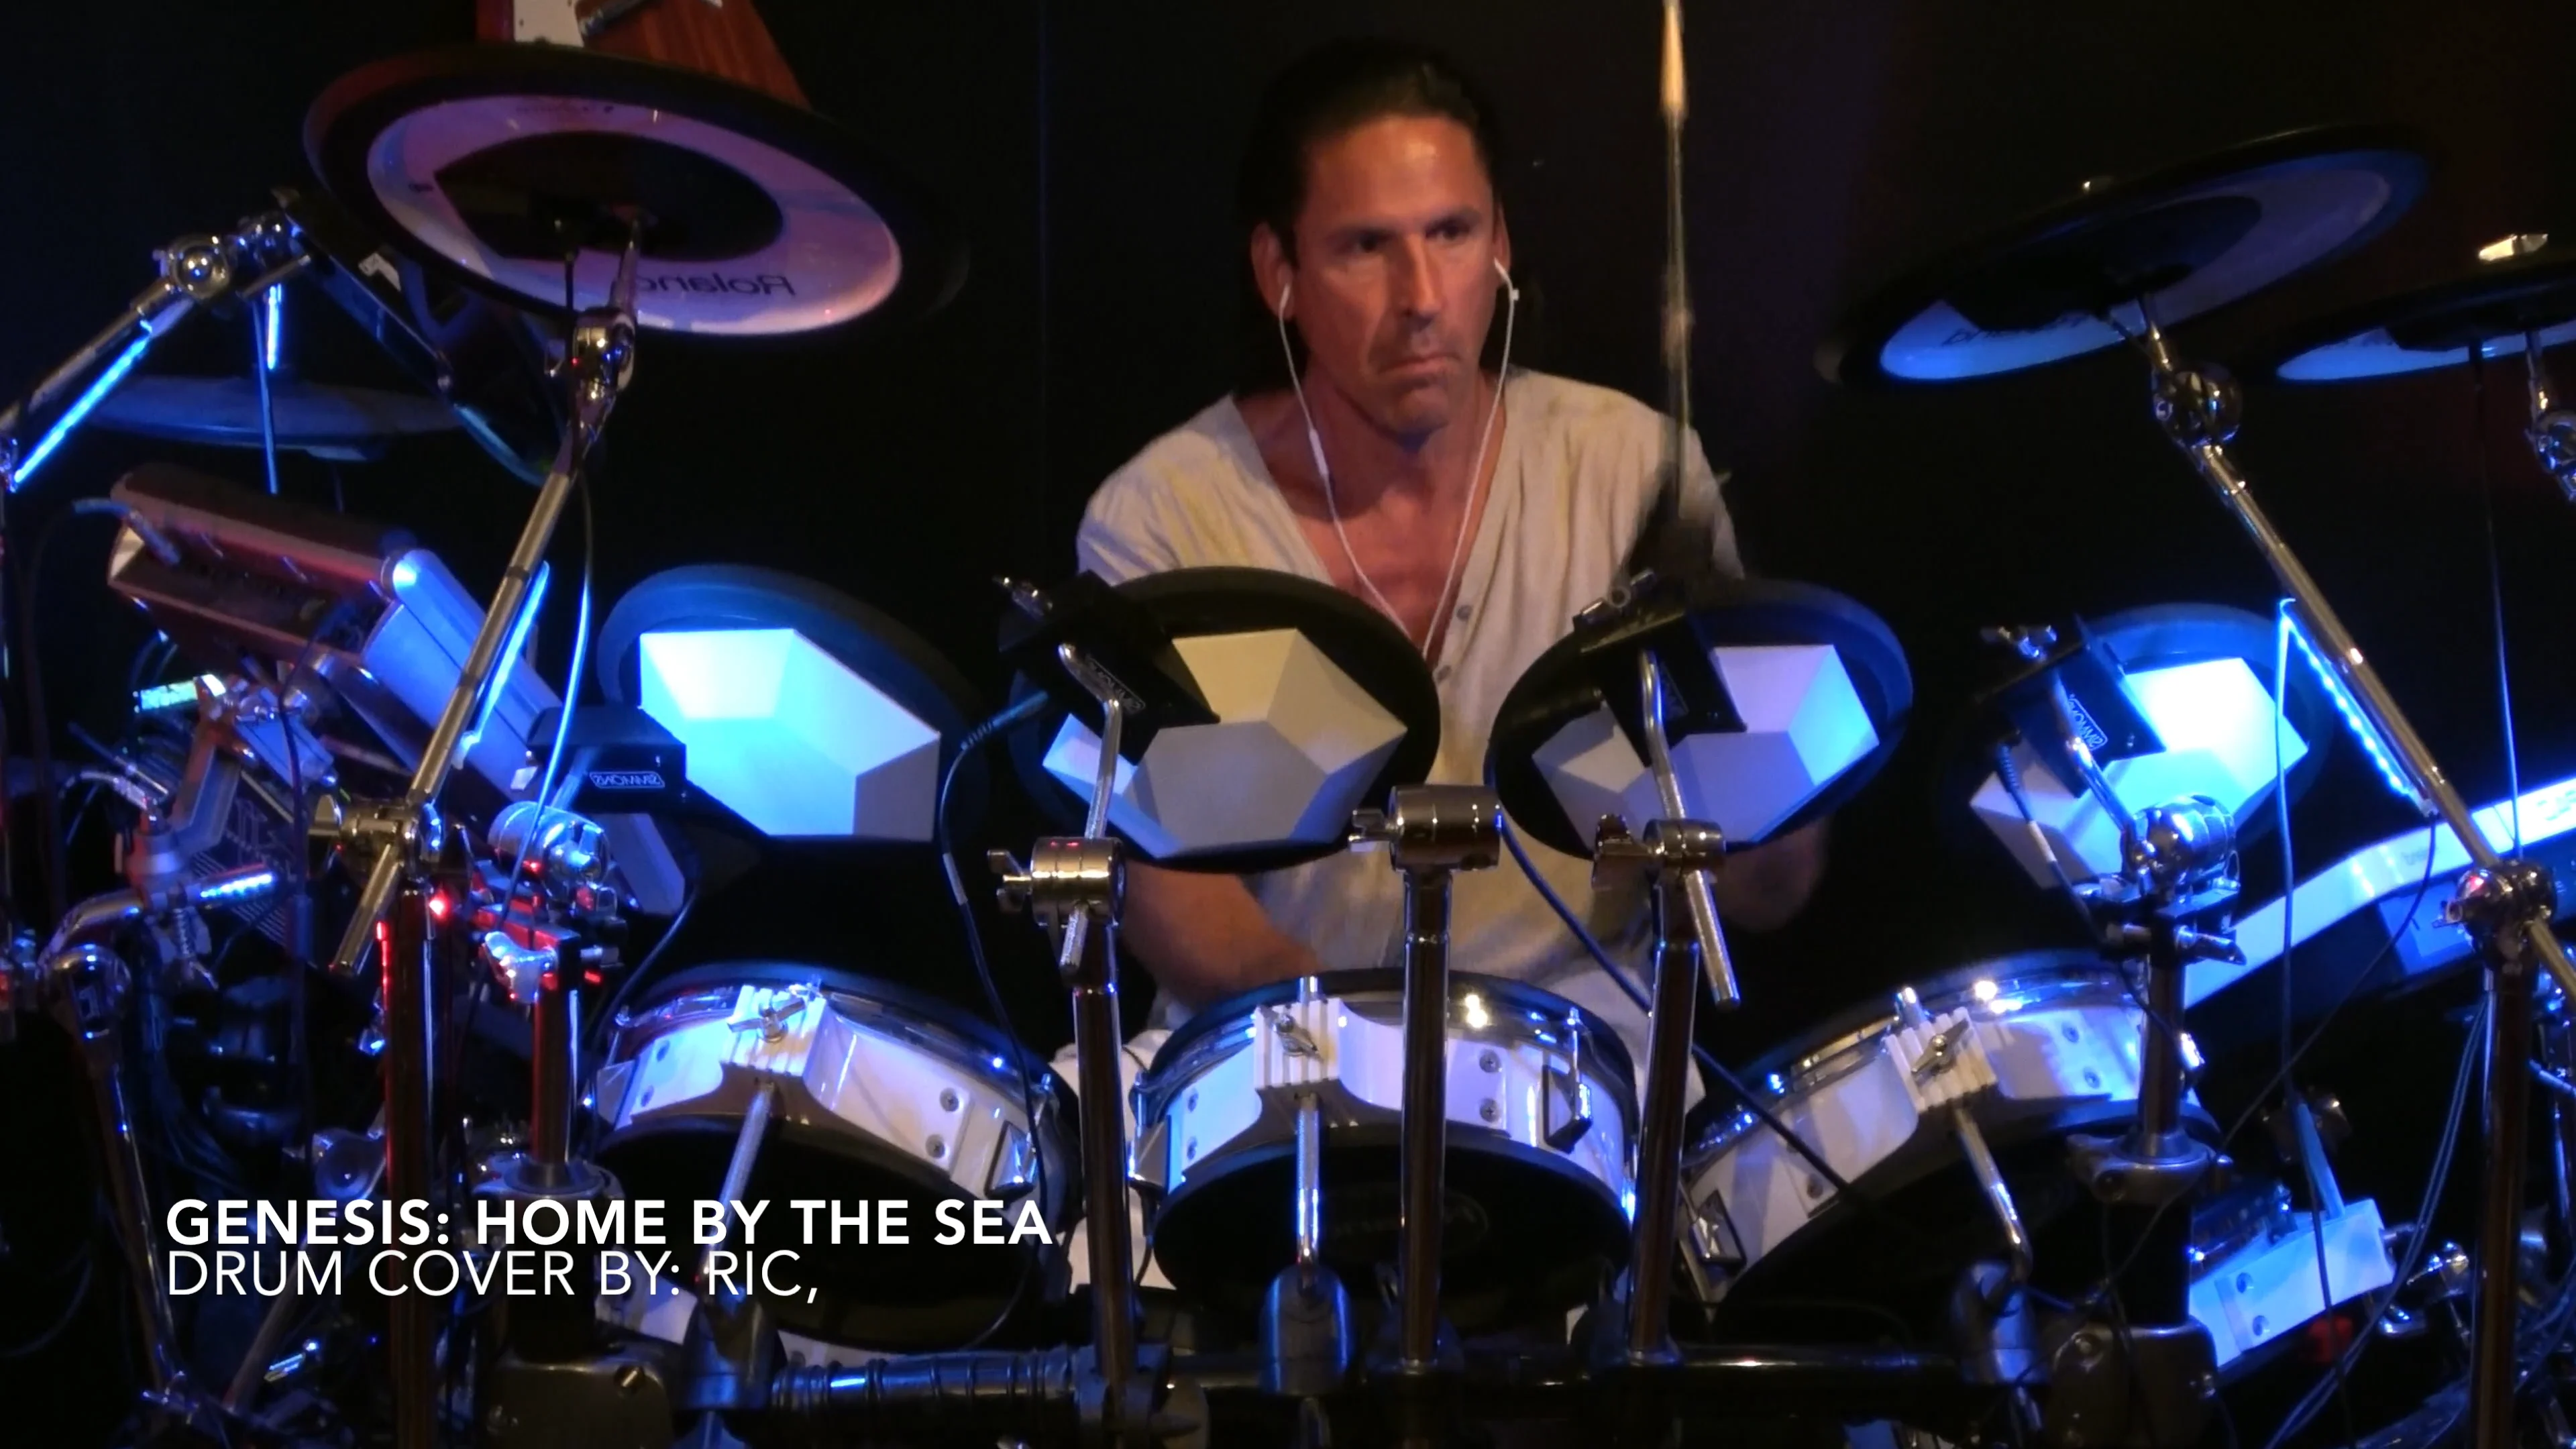 GENESIS: HOME BY THE SEA. DRUM COVER, on Vimeo